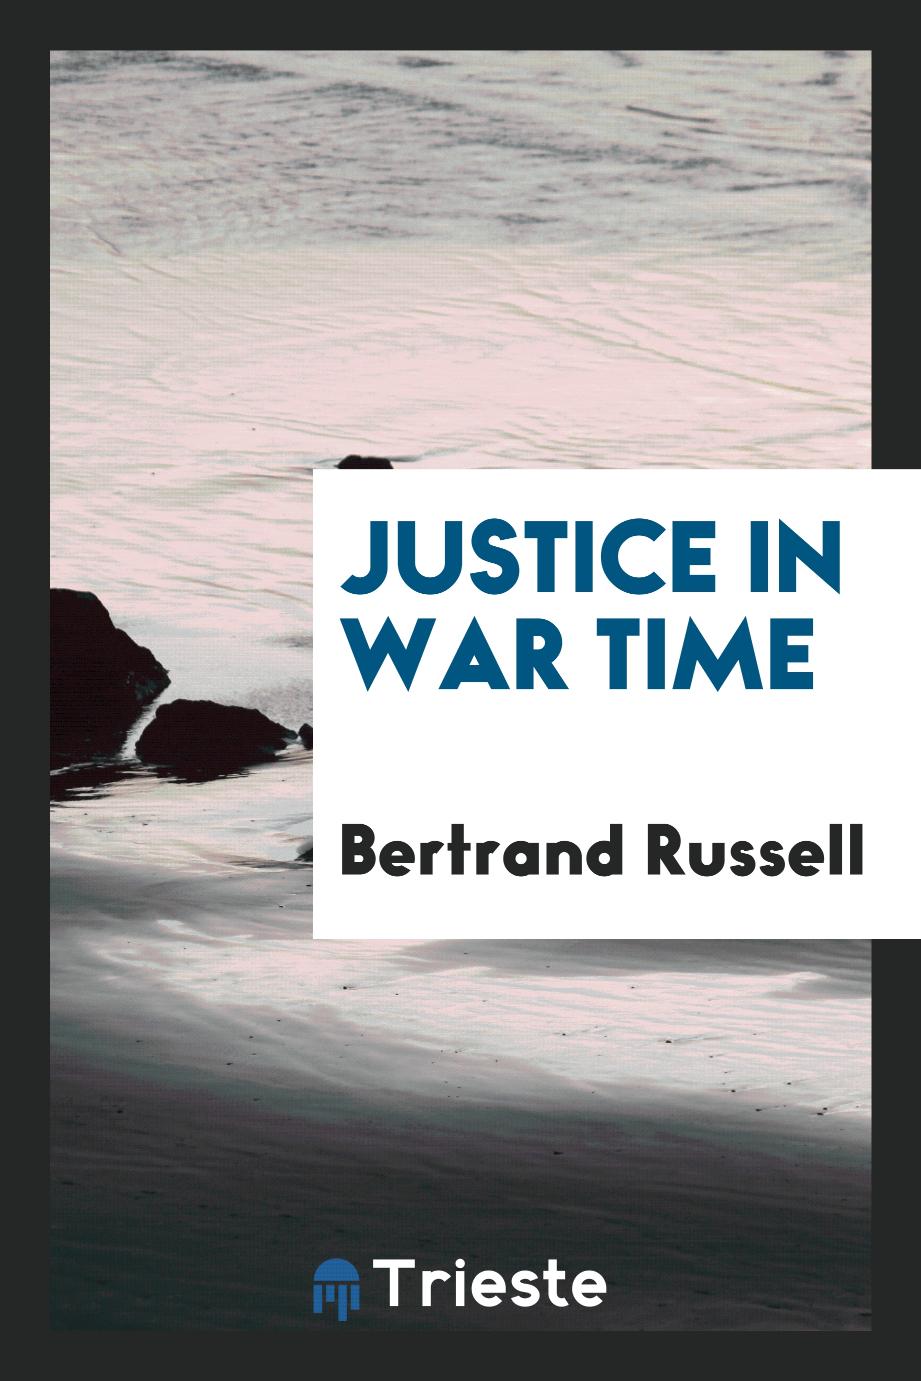 Justice in war time